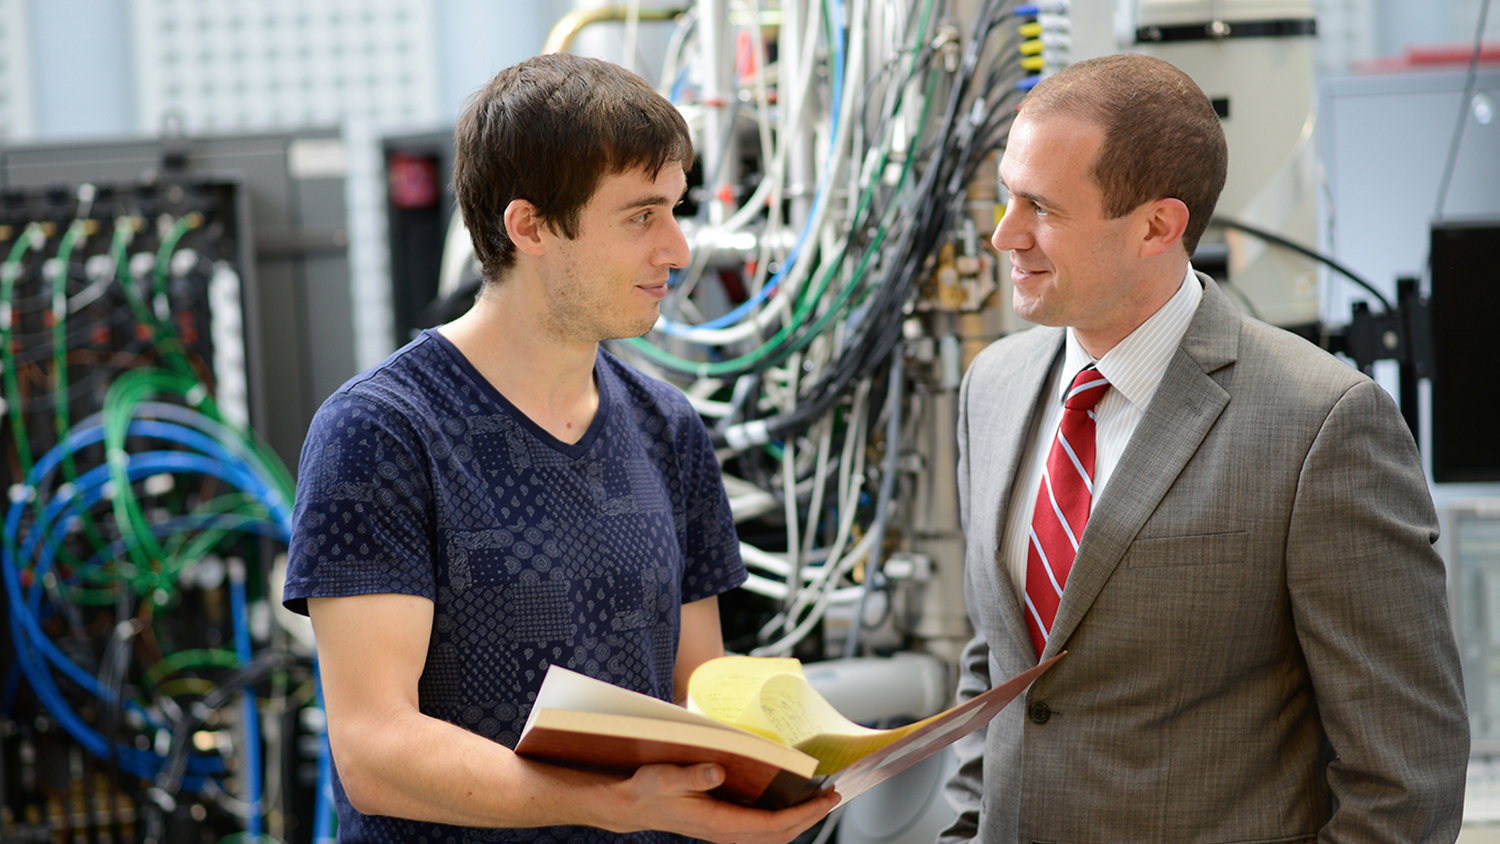 A student and a man in a suit talk in front of a computer server with lots of wires